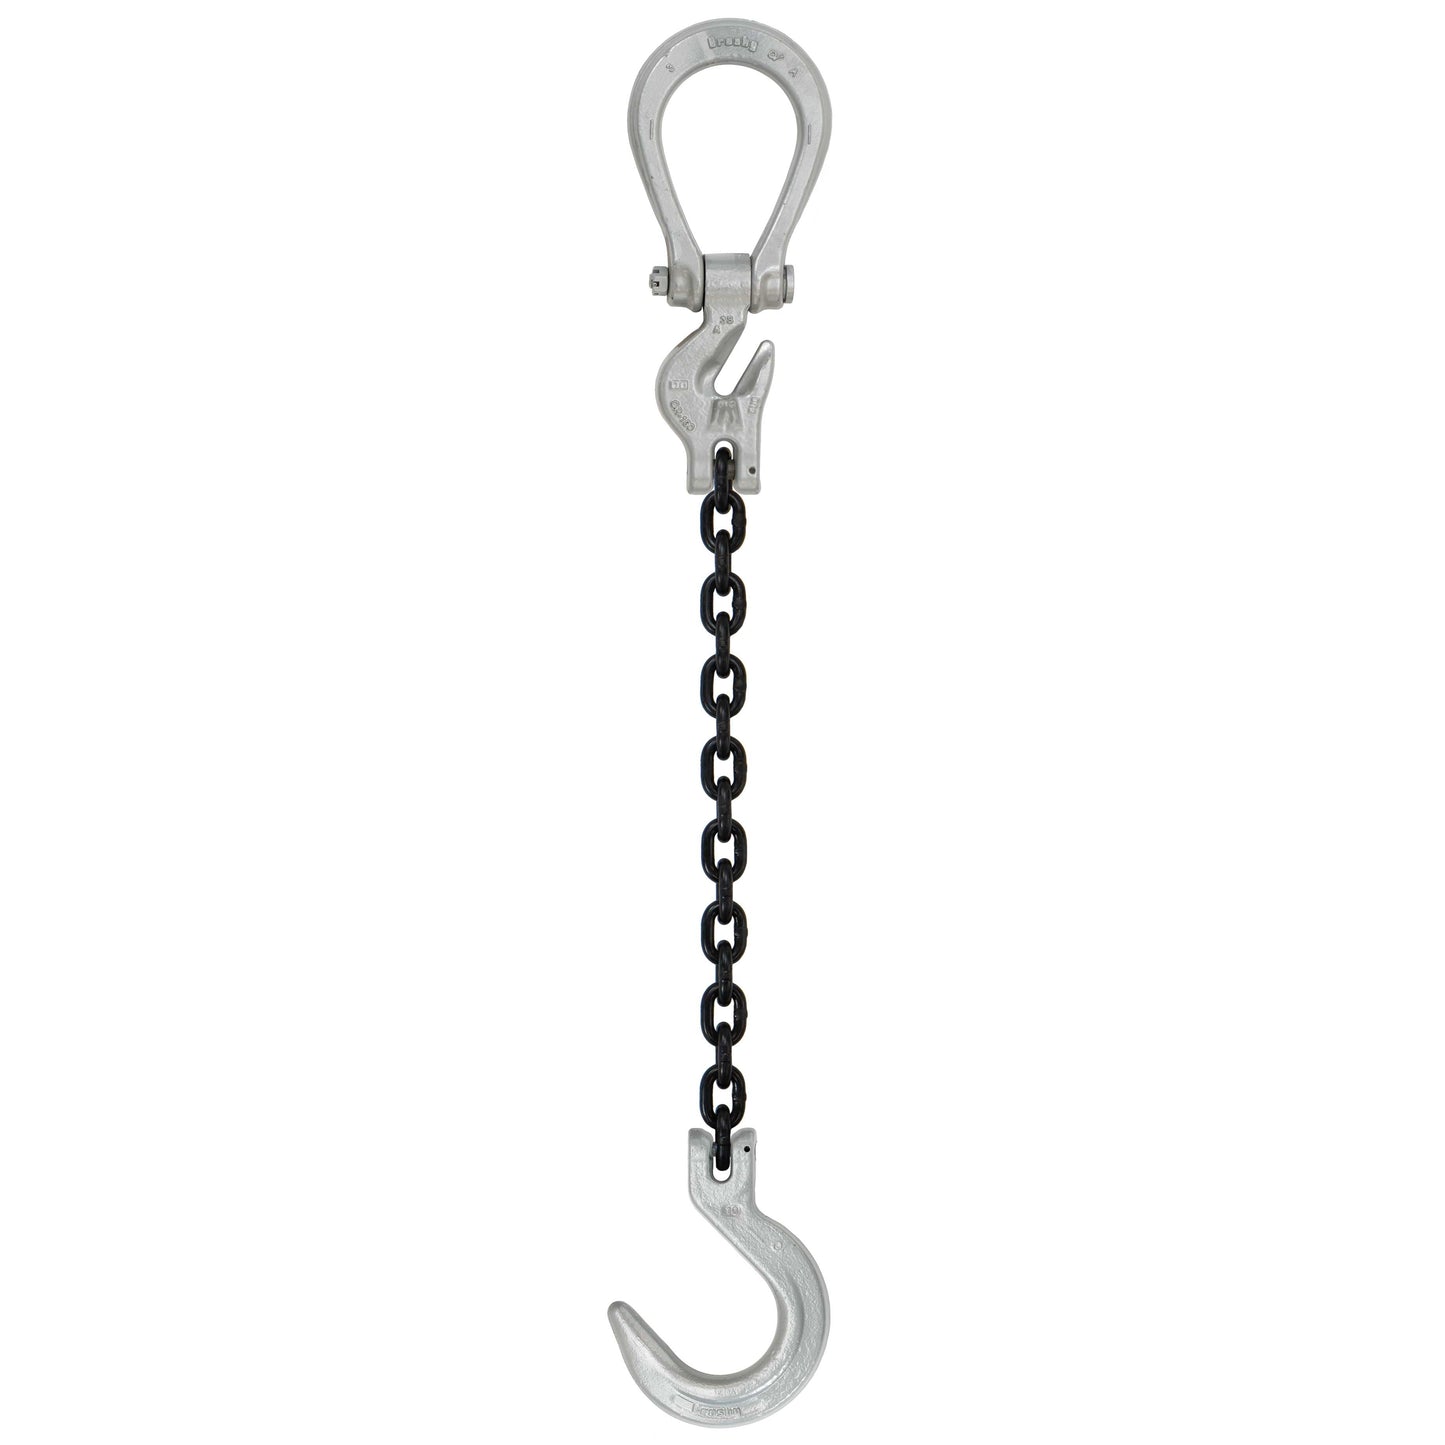 12 inch x 5 foot Domestic Adjustable Single Leg Chain Sling w Crosby Foundry Hook Grade 100 image 1 of 2